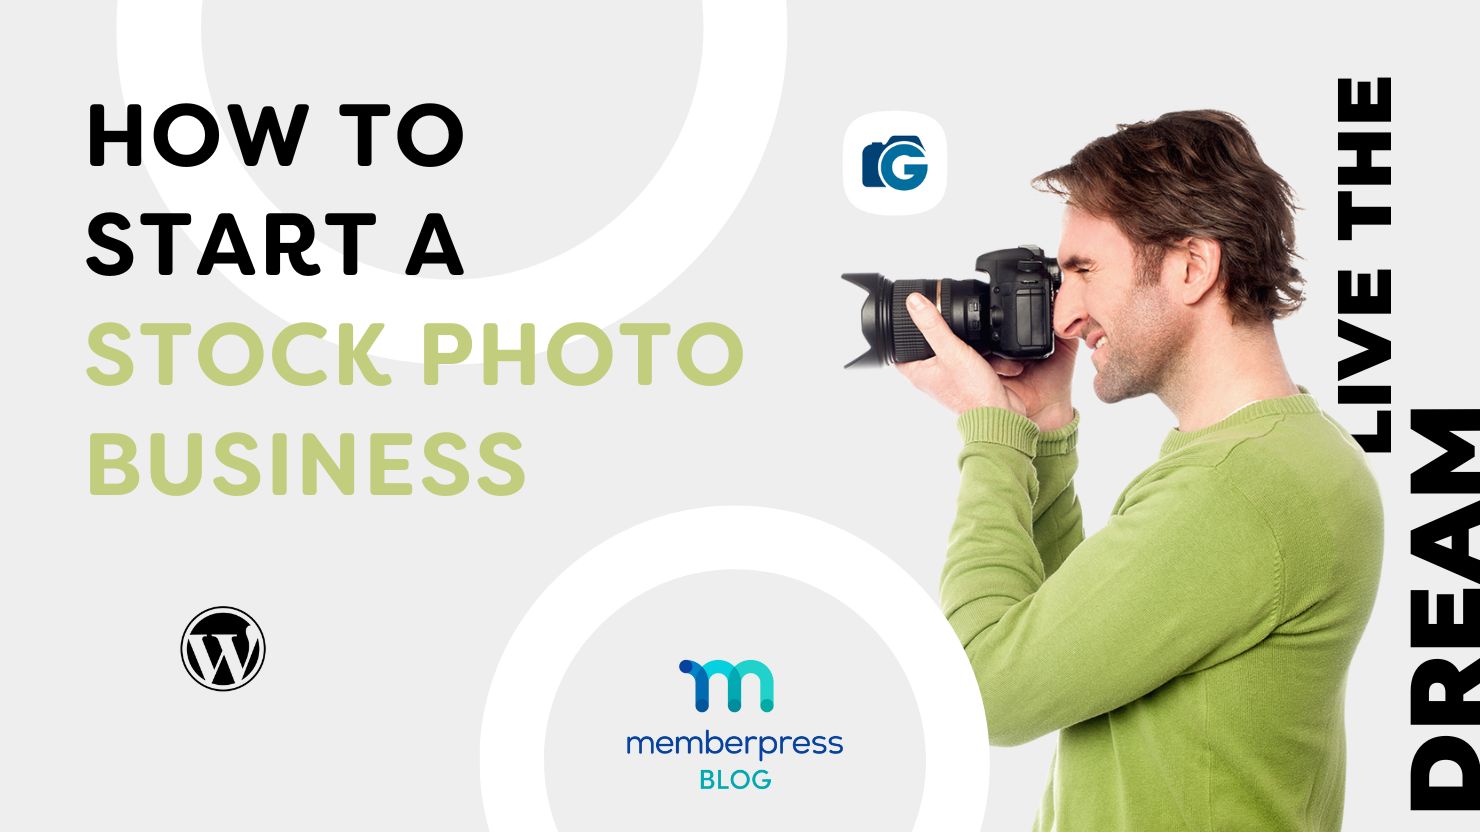 how to start a stock photo business with wordpress memberpress and photo gallery